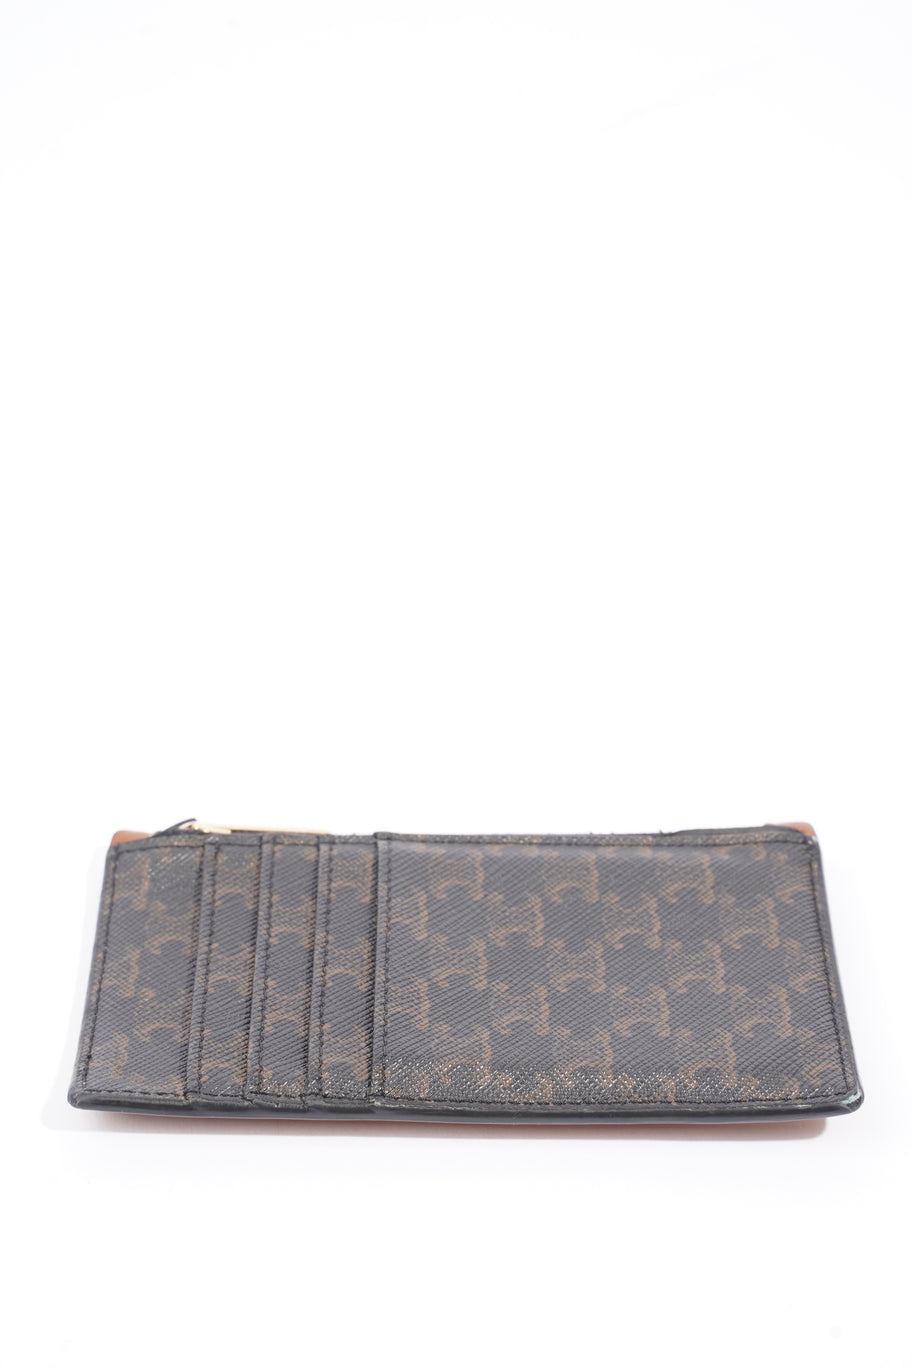 Triomphe Coin Case Brown Monogram Leather Image 3